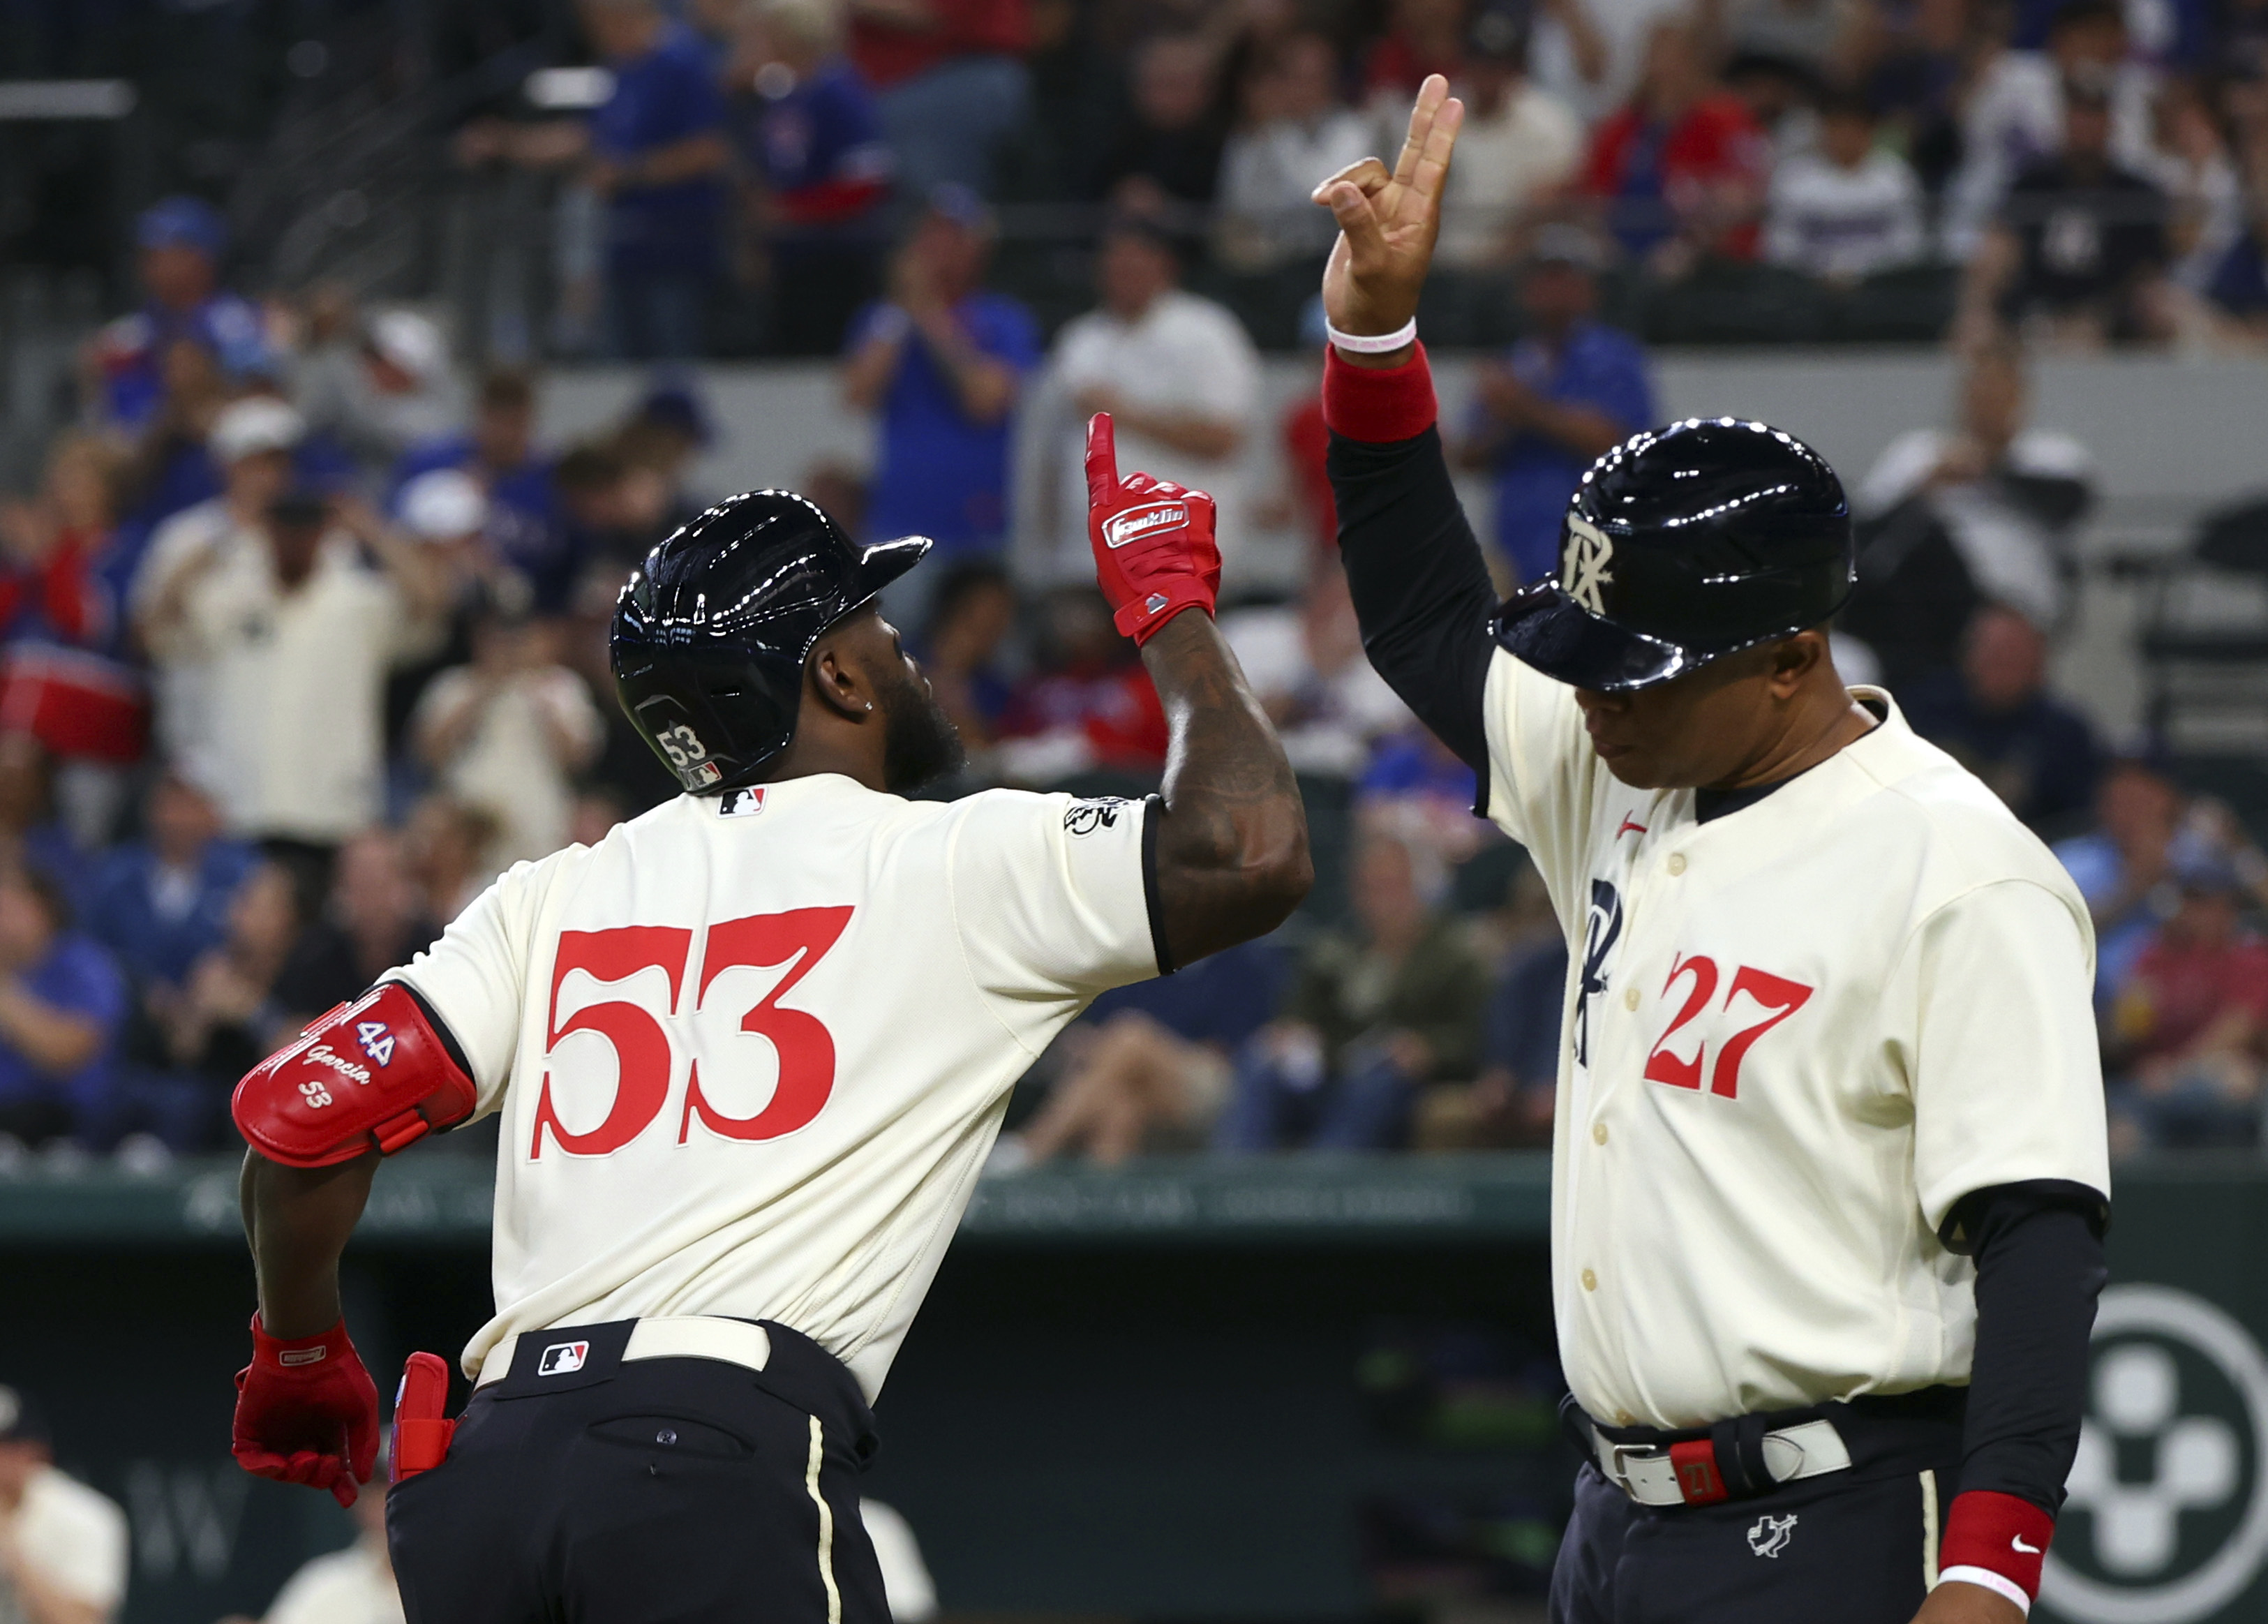 Rangers beat Oakland 3-18 at home